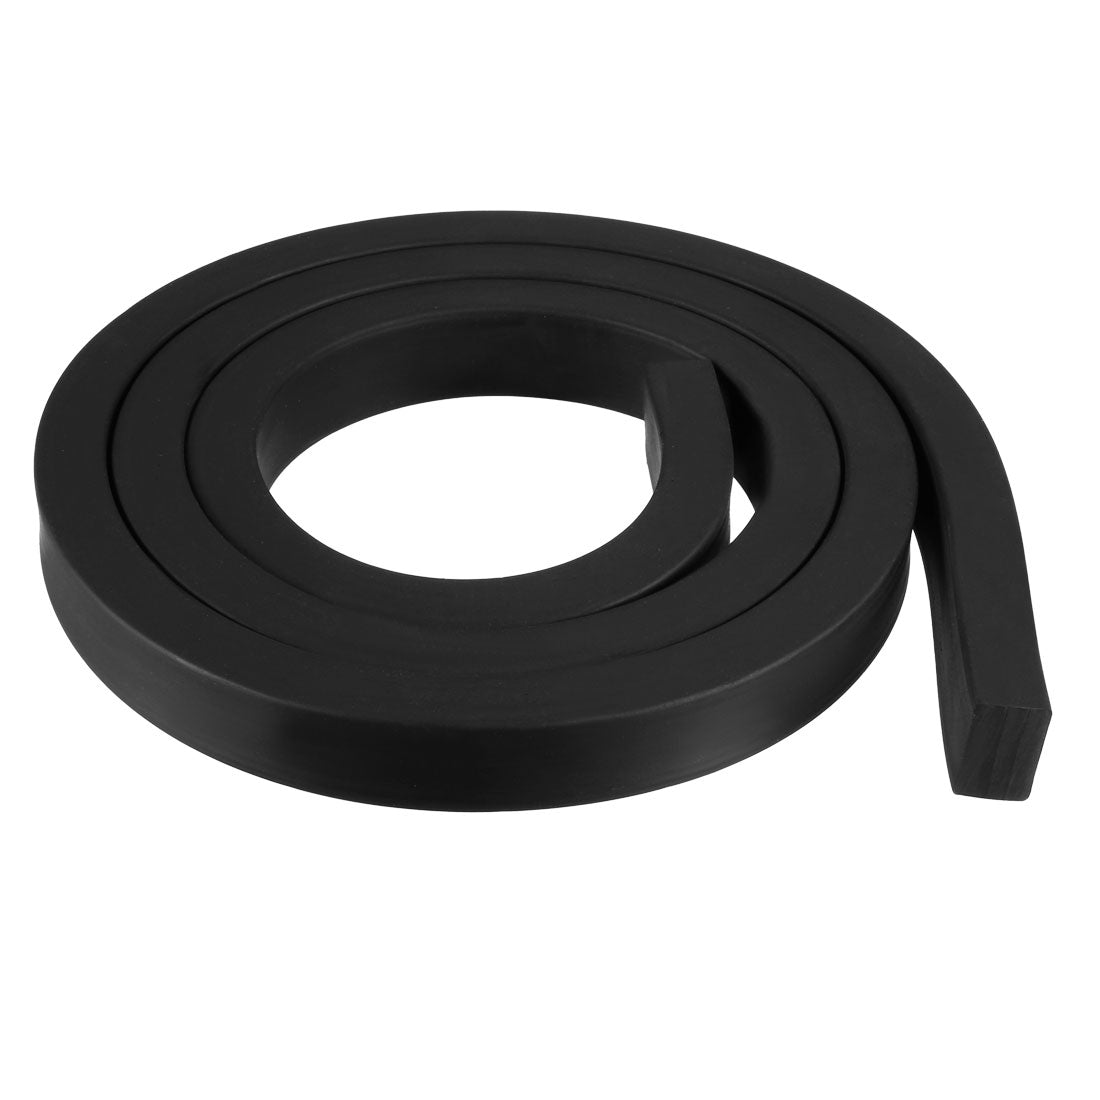 uxcell Uxcell Solid Rectangle Rubber Seal Strip 15mm Wide 10mm Thick, 1 Meter Long Black